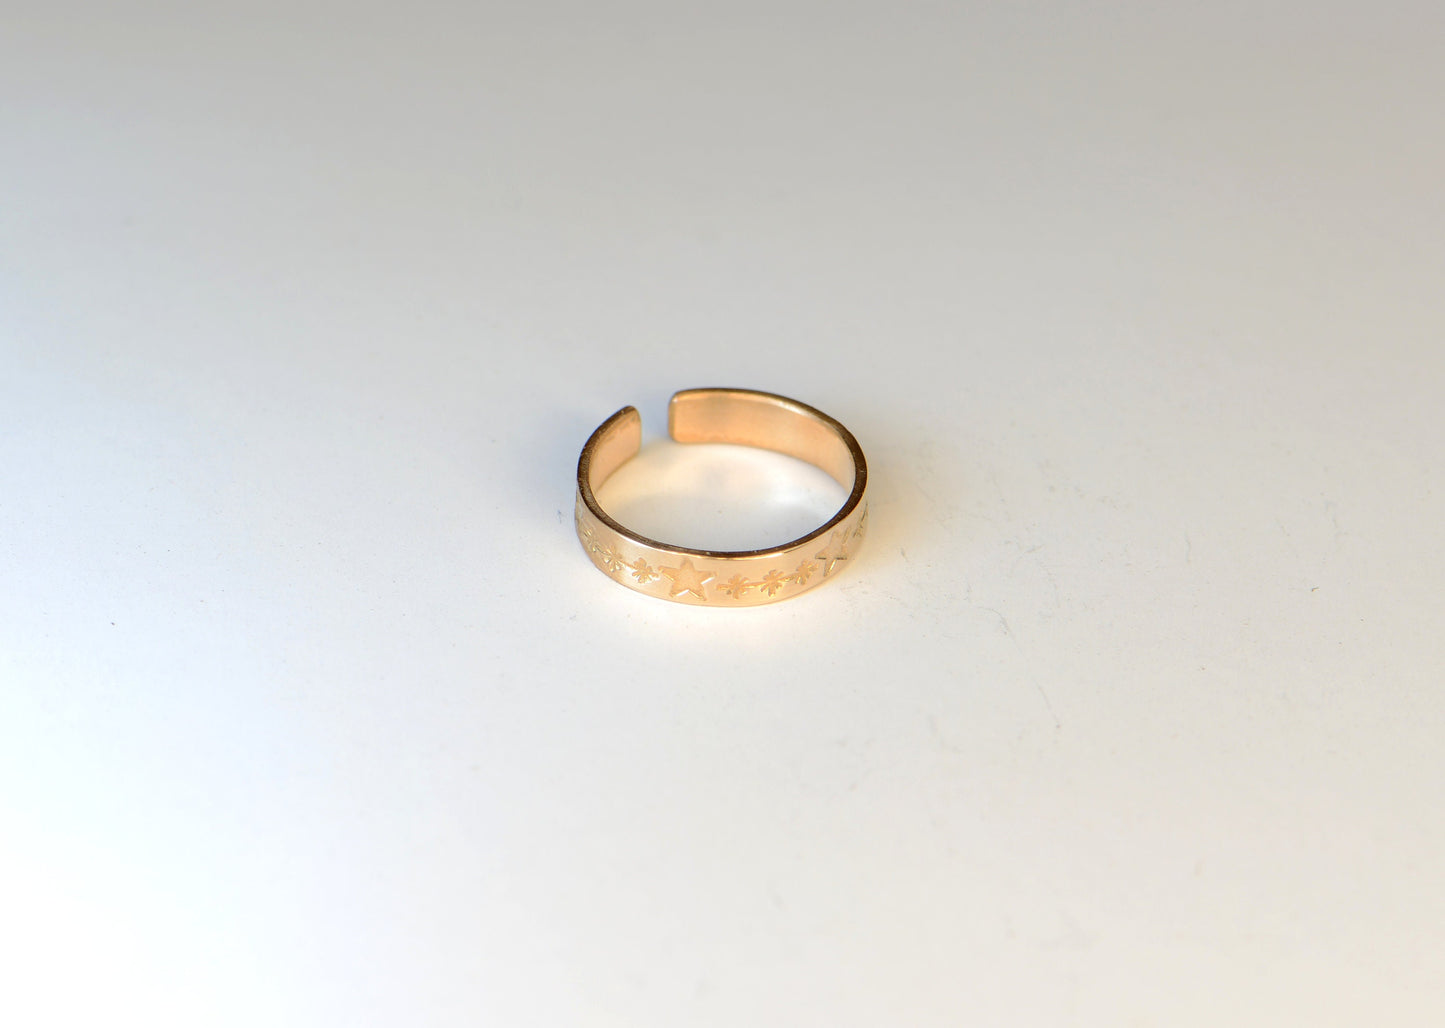 Solid 14k yellow gold toe ring stamped with stars